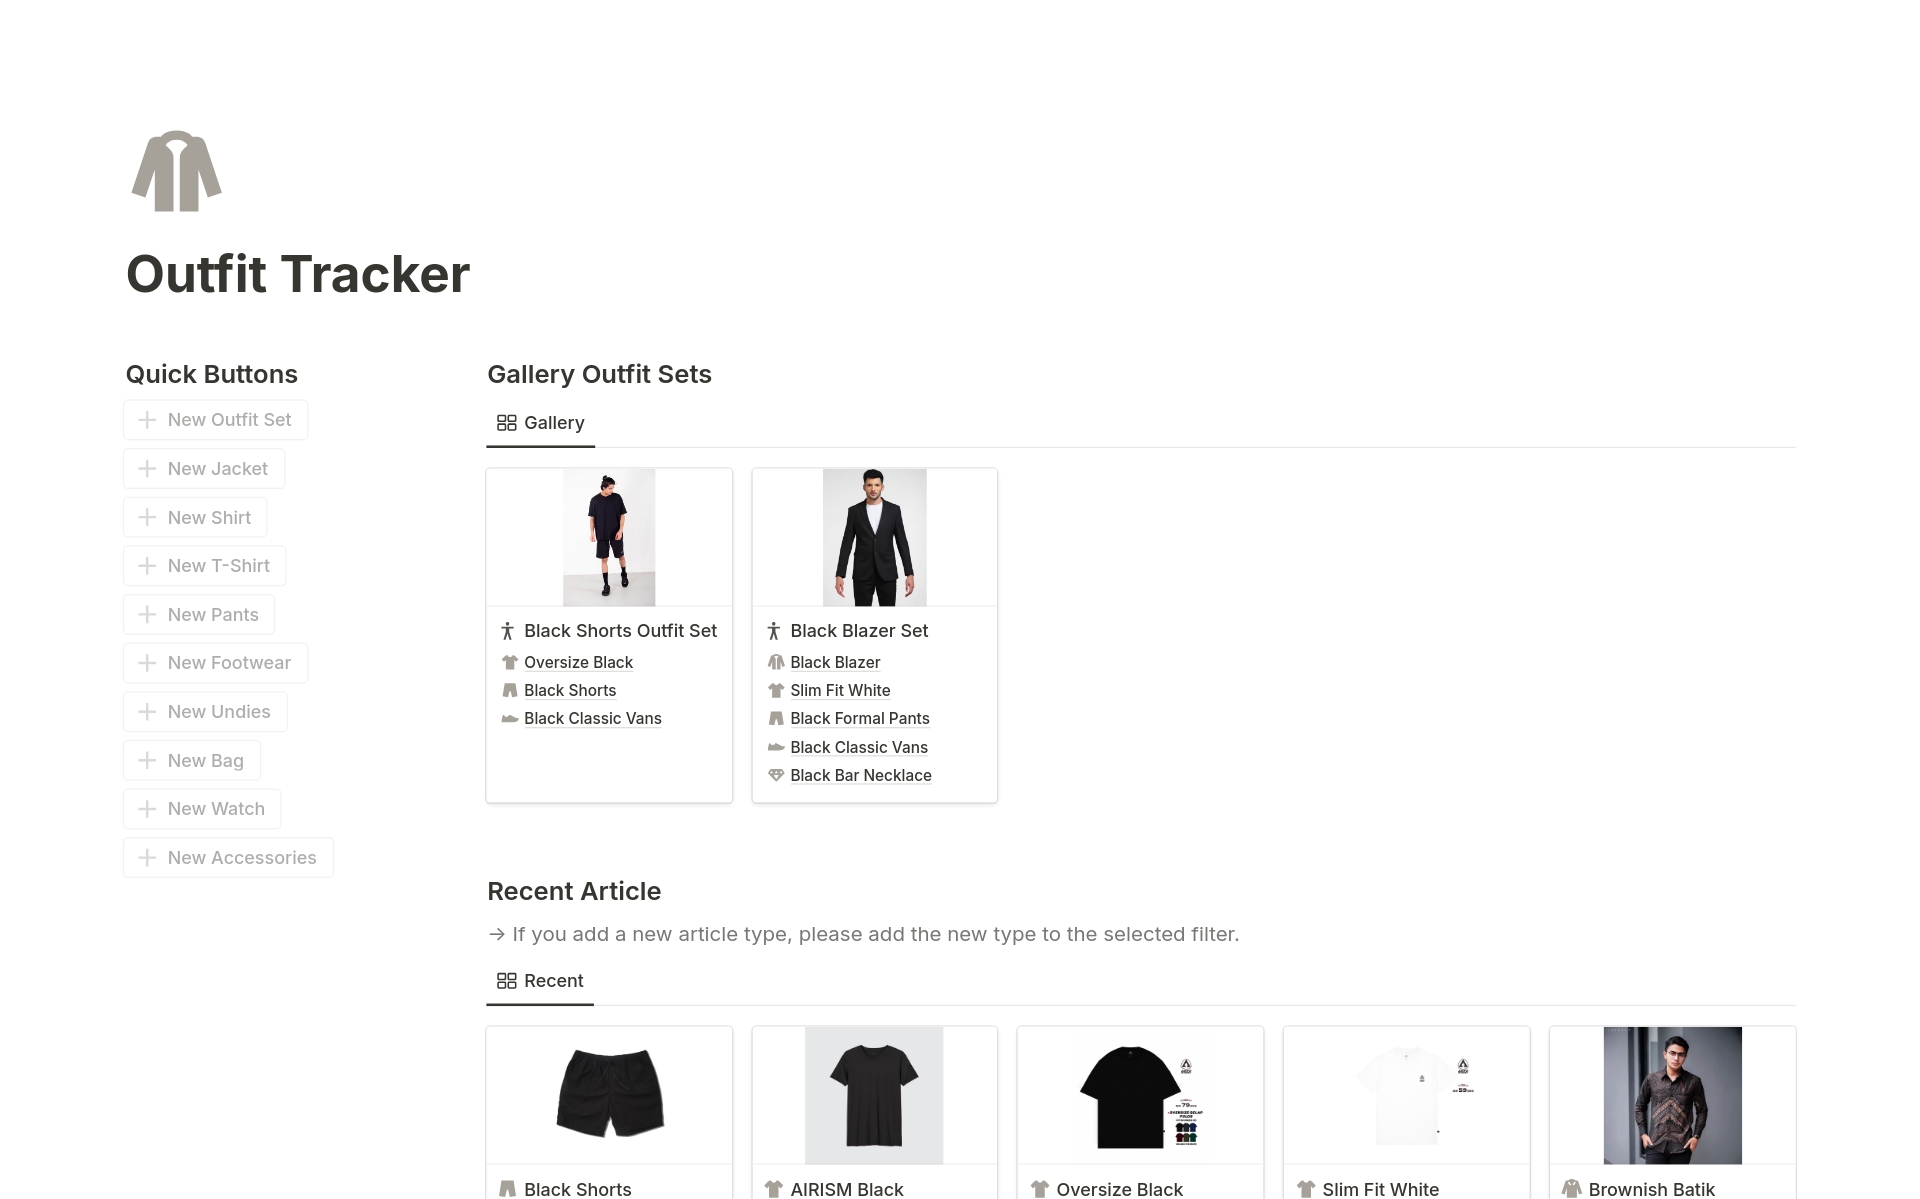 
Easily monitor your outfit sets using our Notion template. Enjoy a gallery view for quick browsing, with sections for size, type, store details, and prices, all conveniently located on a single page. Stay fashionably organized!